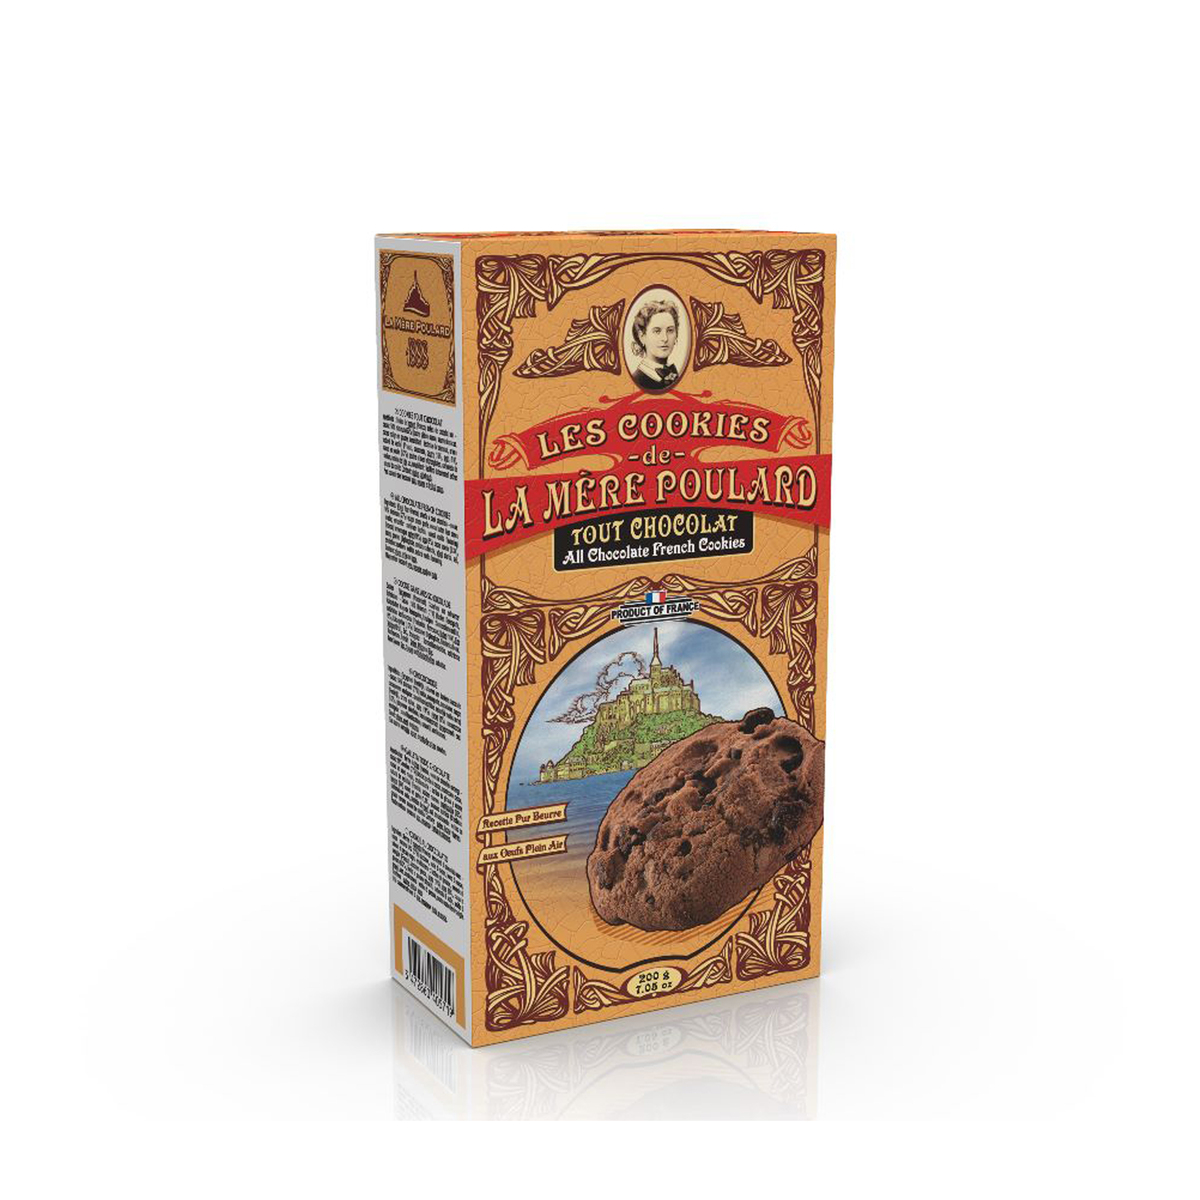 La Mere Poulard French Chocolate Cookies 200 g